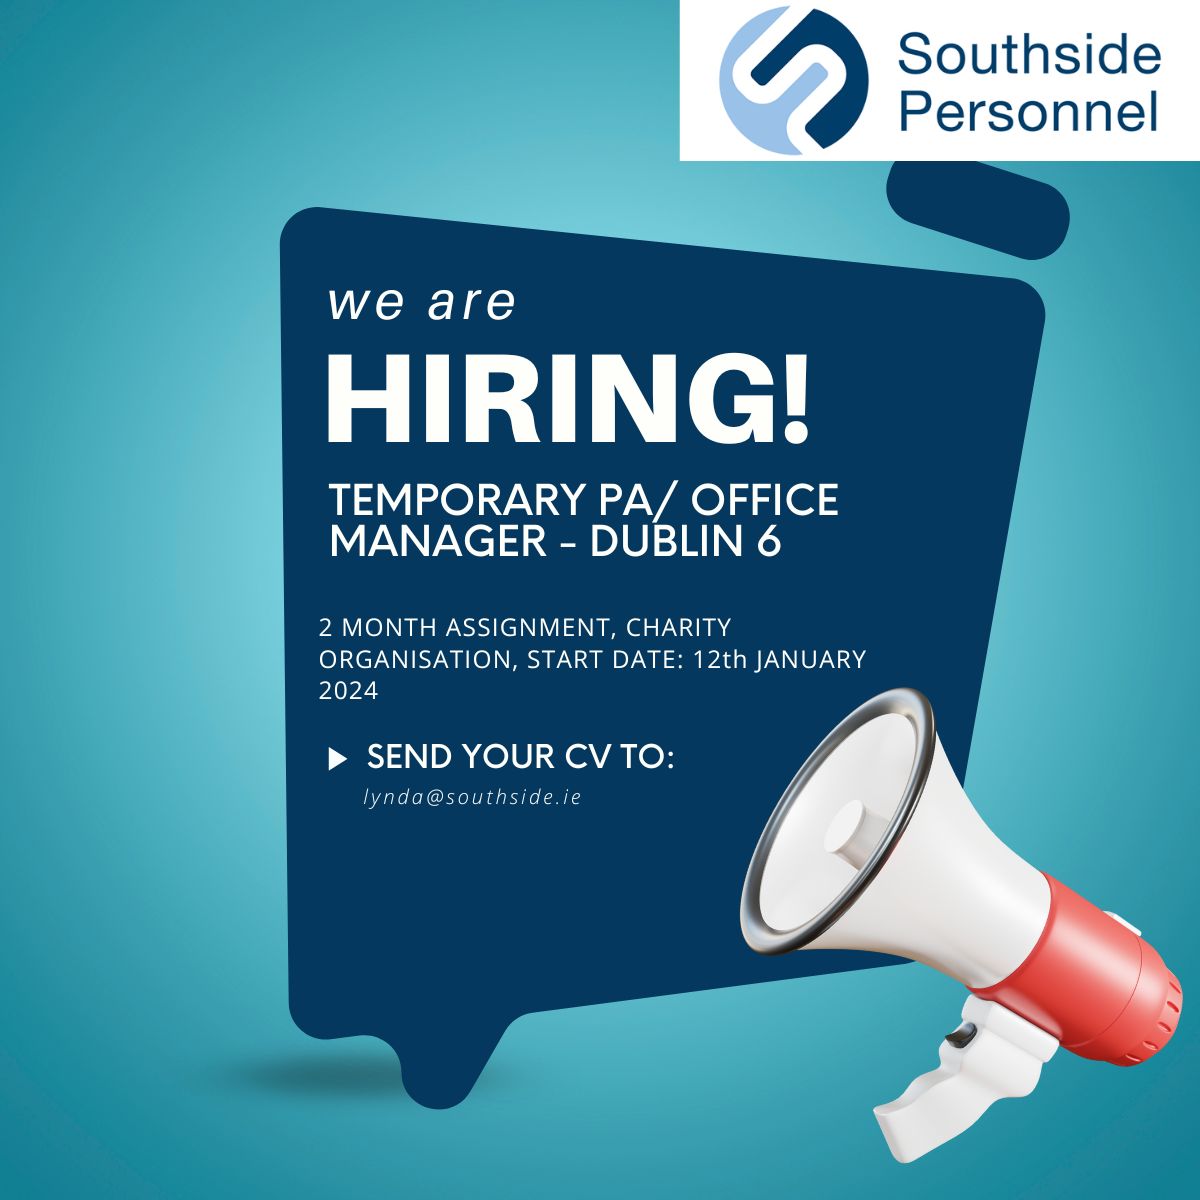 We have a fantastic new opportunity for an experienced PA/Office Manager, who is available from 12th January 2024 for a 2 month period. 🌟. Hourly Rate: €22k, 9am-5pm Mon-Fri on site in D6. Charity organisation. Email a cv to lynda@southside.ie  #dublinjobs #jobfairy